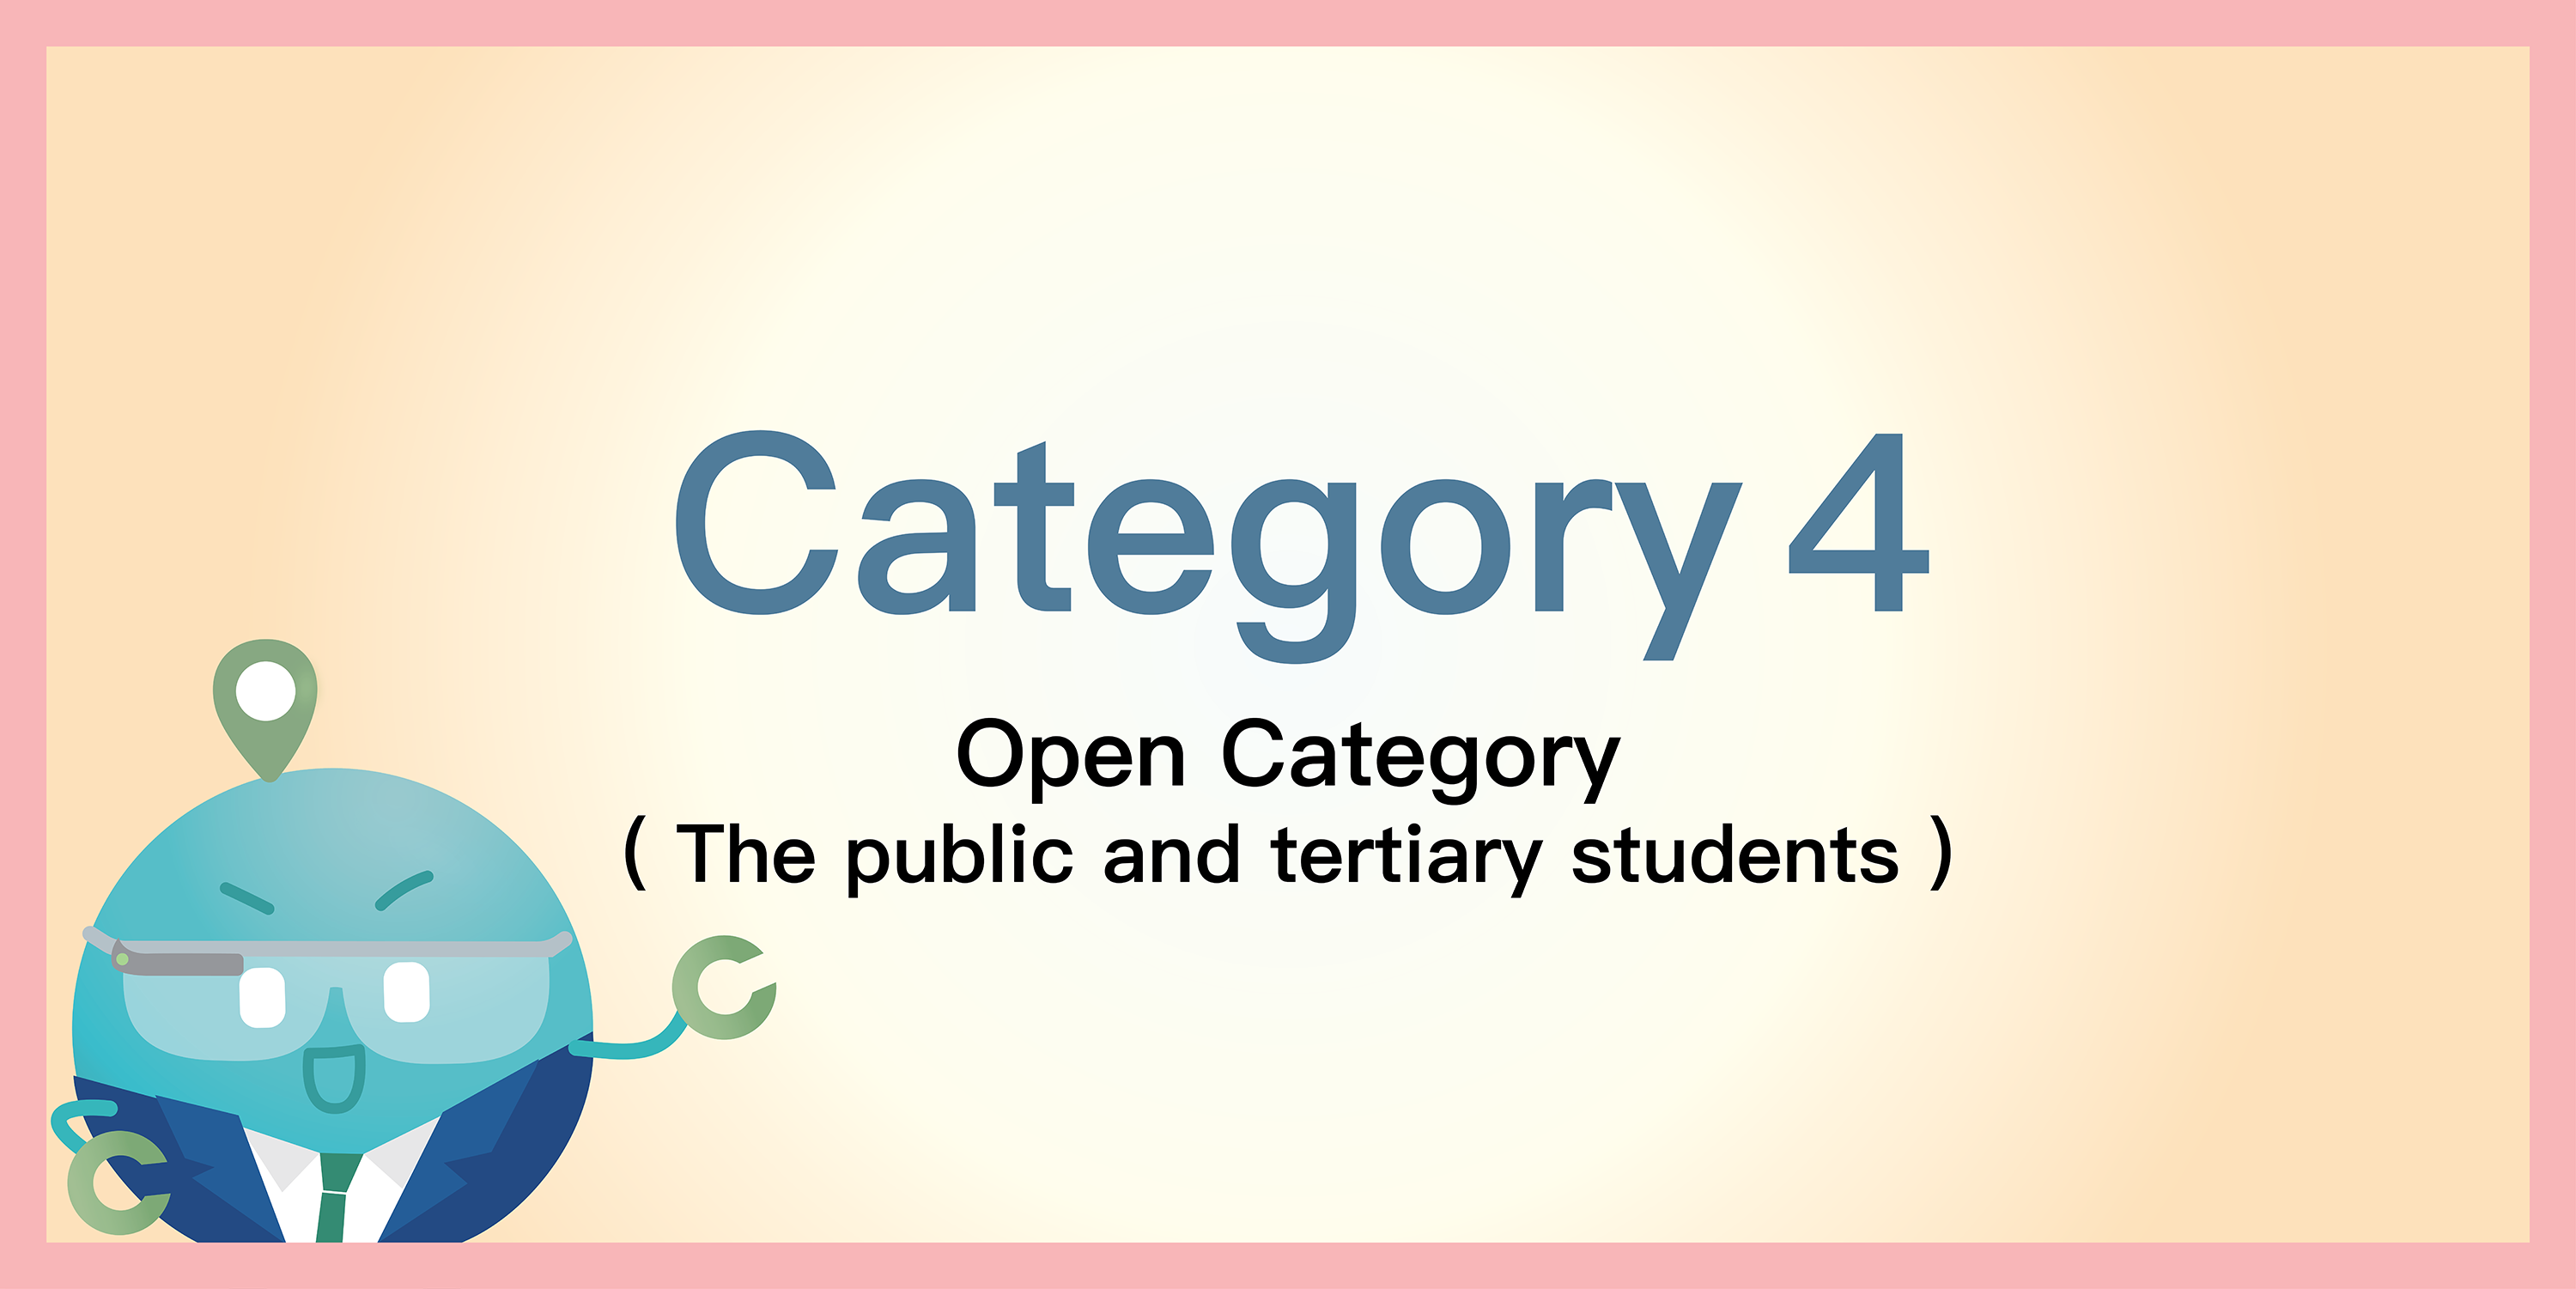 Category 4: Open Category (individuals from the public and tertiary students)